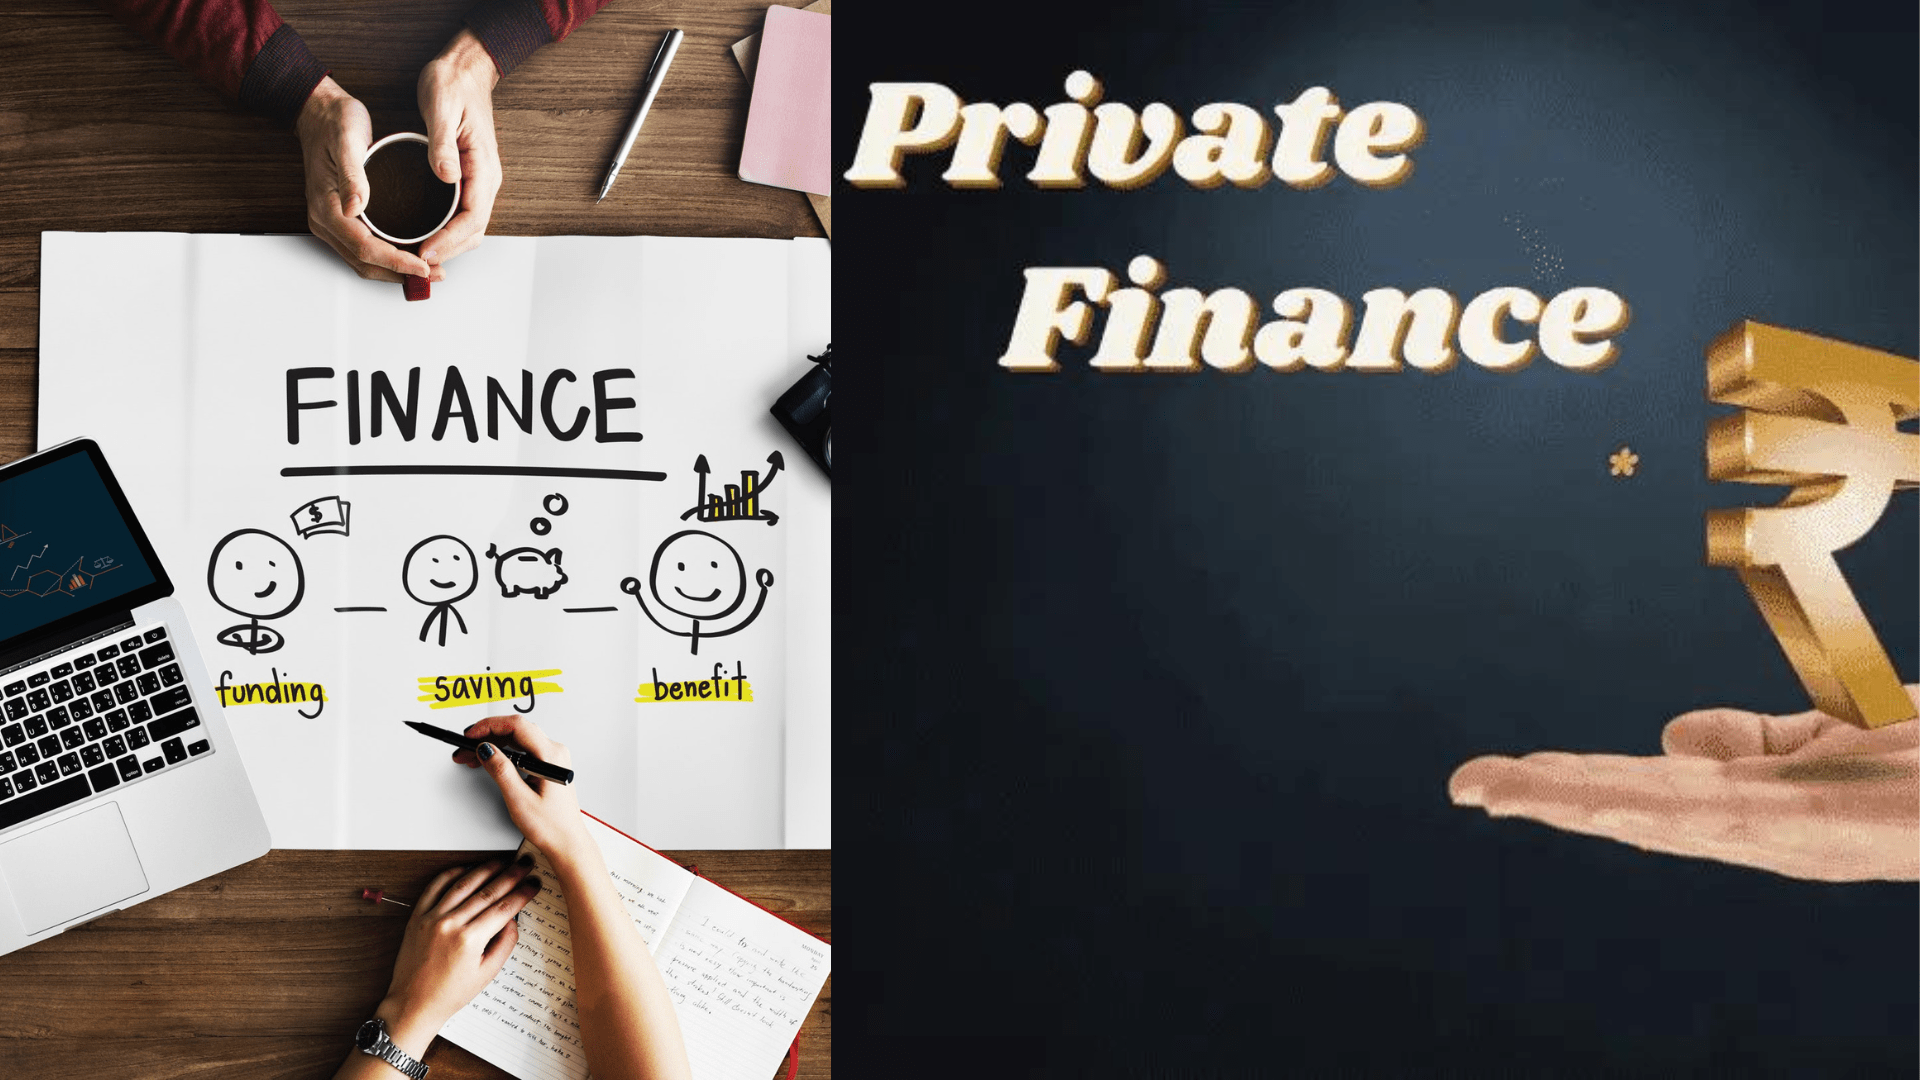 What is Private Finance